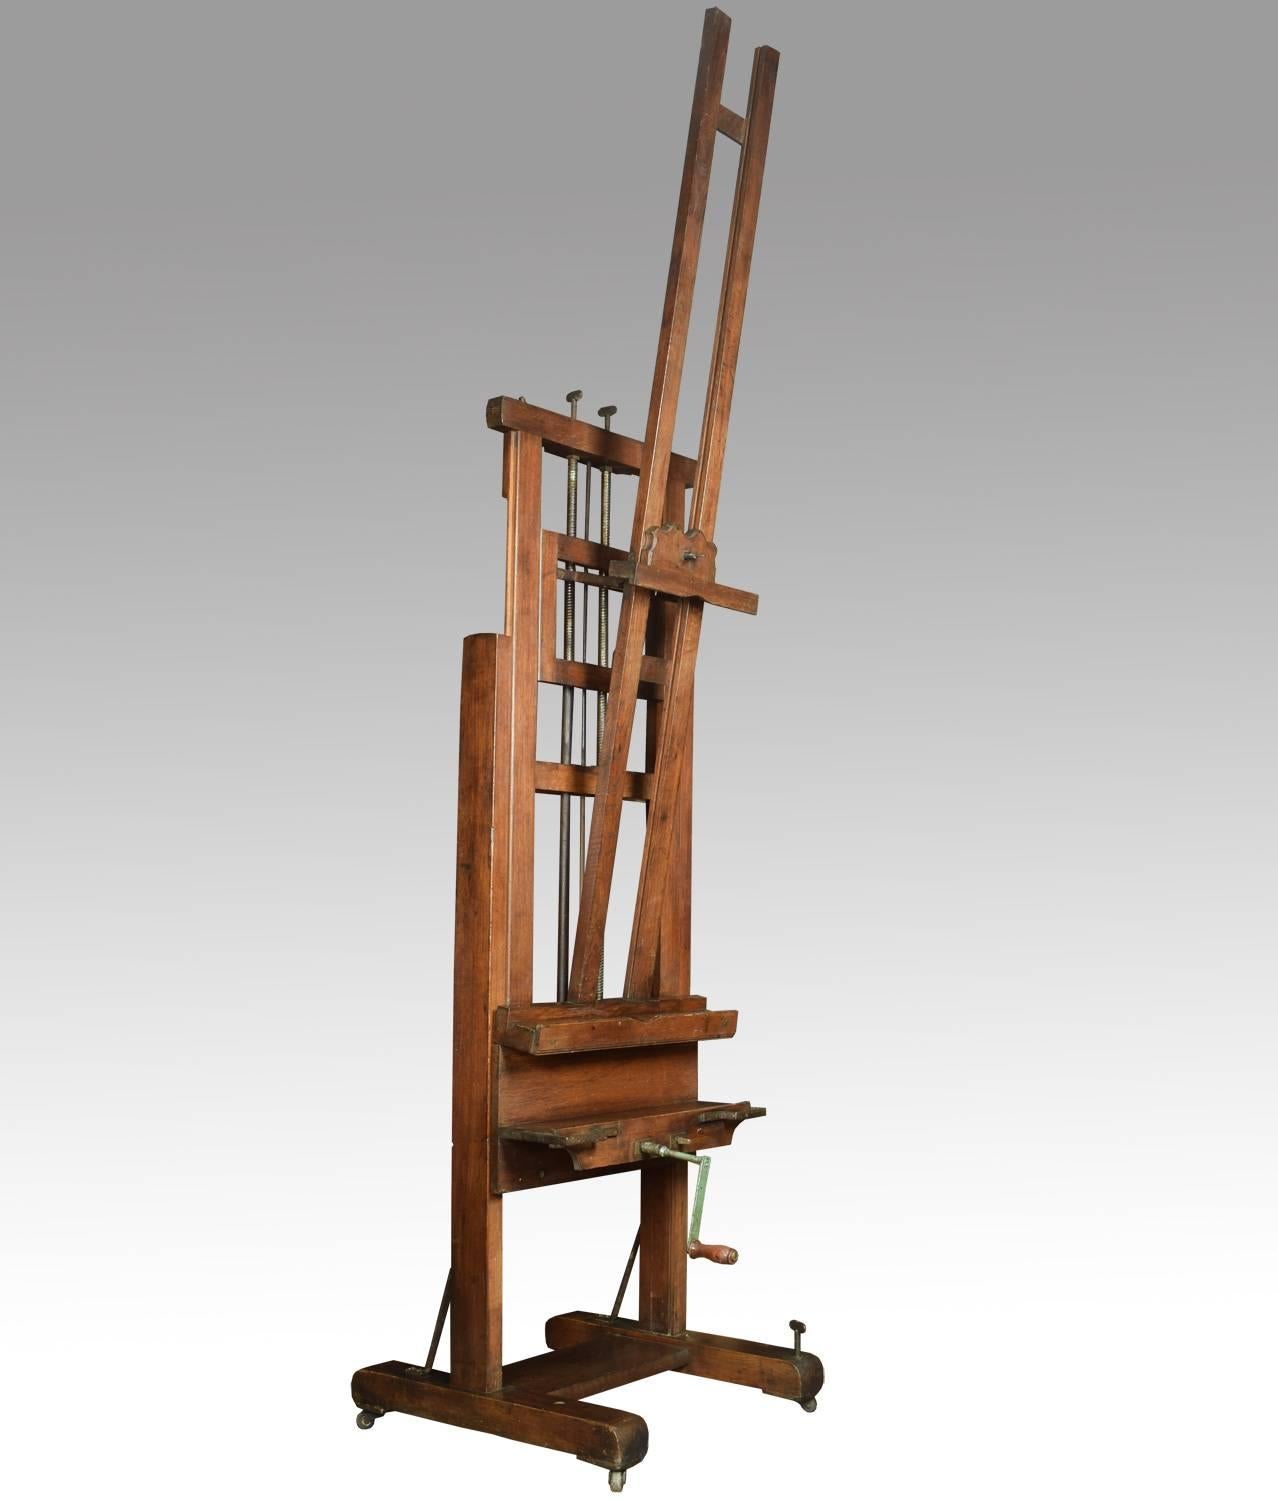 Large oak artist’s fully adjustable studio easel raised up on trestle base terminating in original castors.

Dimensions: 
Height 132 when fully extended 96 inches when closed.
Width 25.5 inches.
Depth 28 inches.